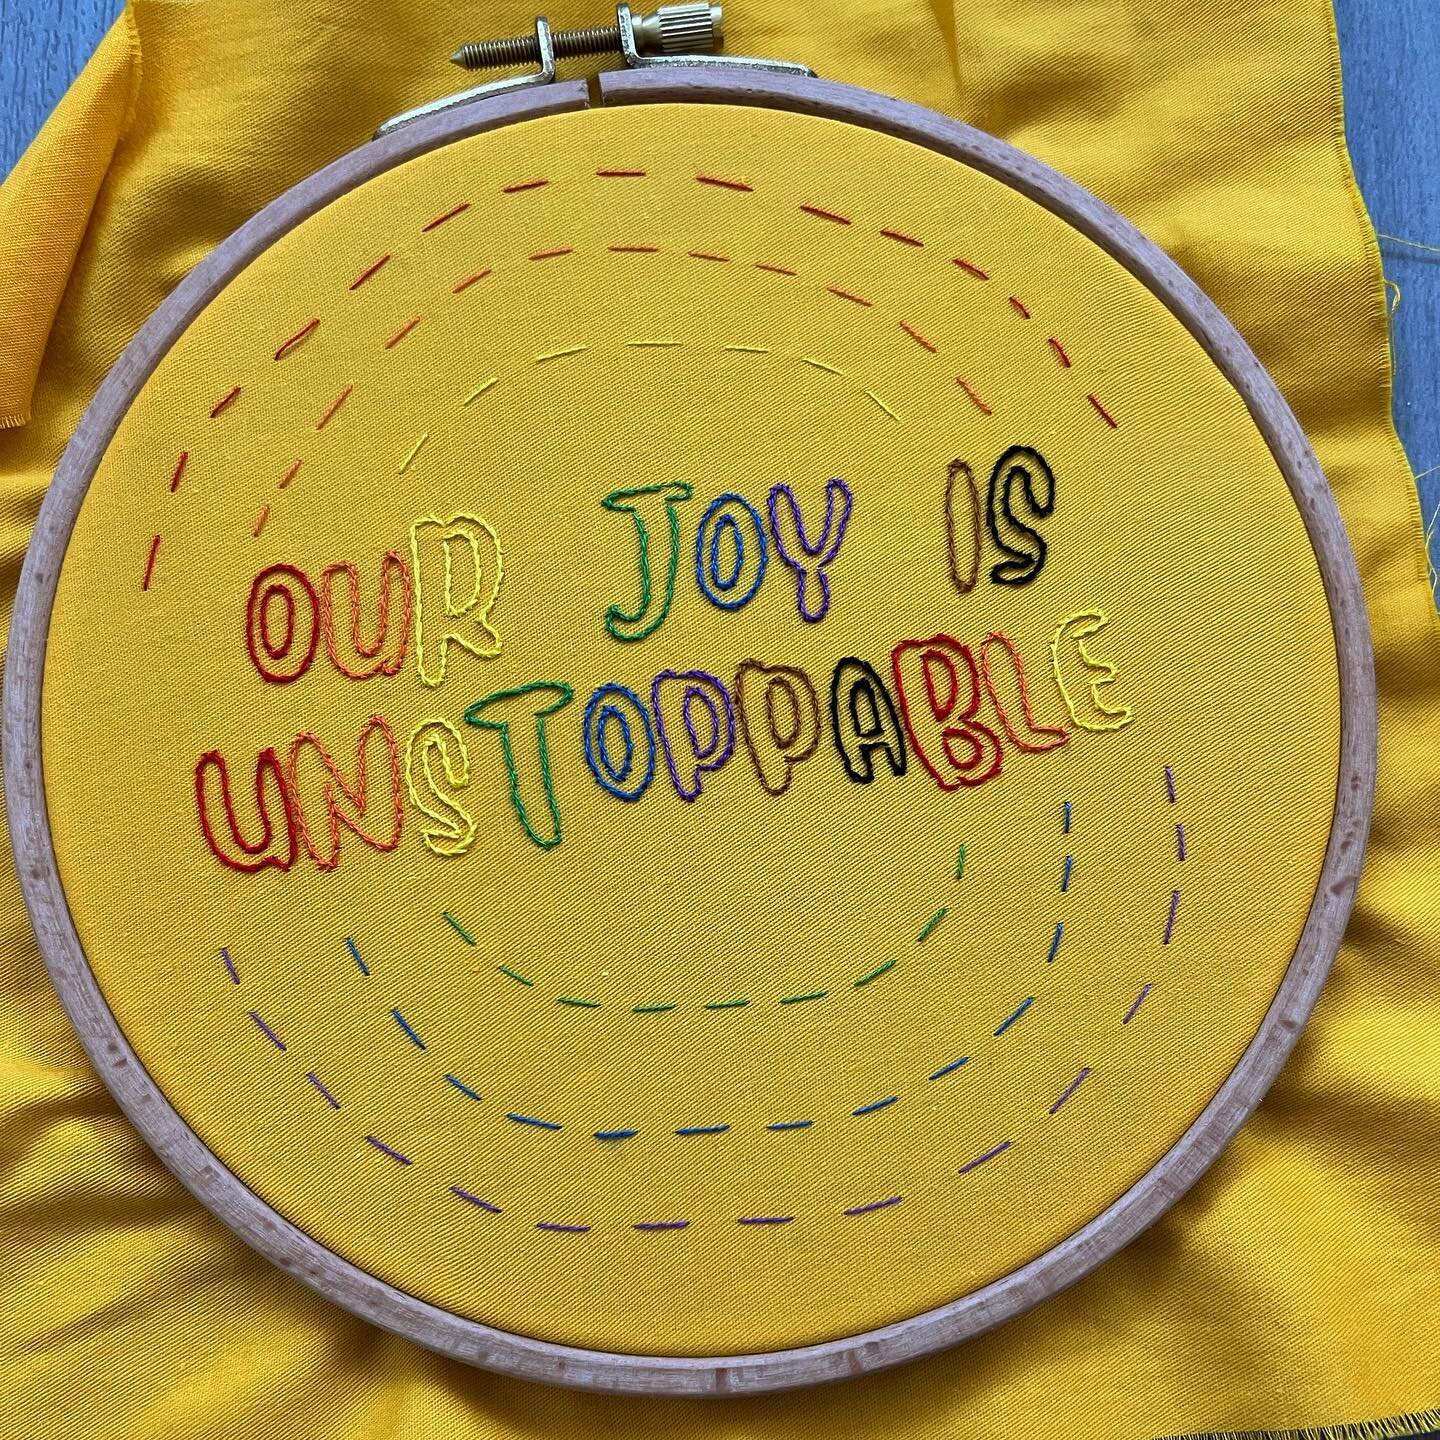 They want us afraid. They want us closeted. They want to strip us of our rights. They want us dead. What they don&rsquo;t seem to understand is that is our collective joy is unstoppable. 

#clubq #clubqshooting #lgbtq #lgbtq🌈 #craftivism #queerartis